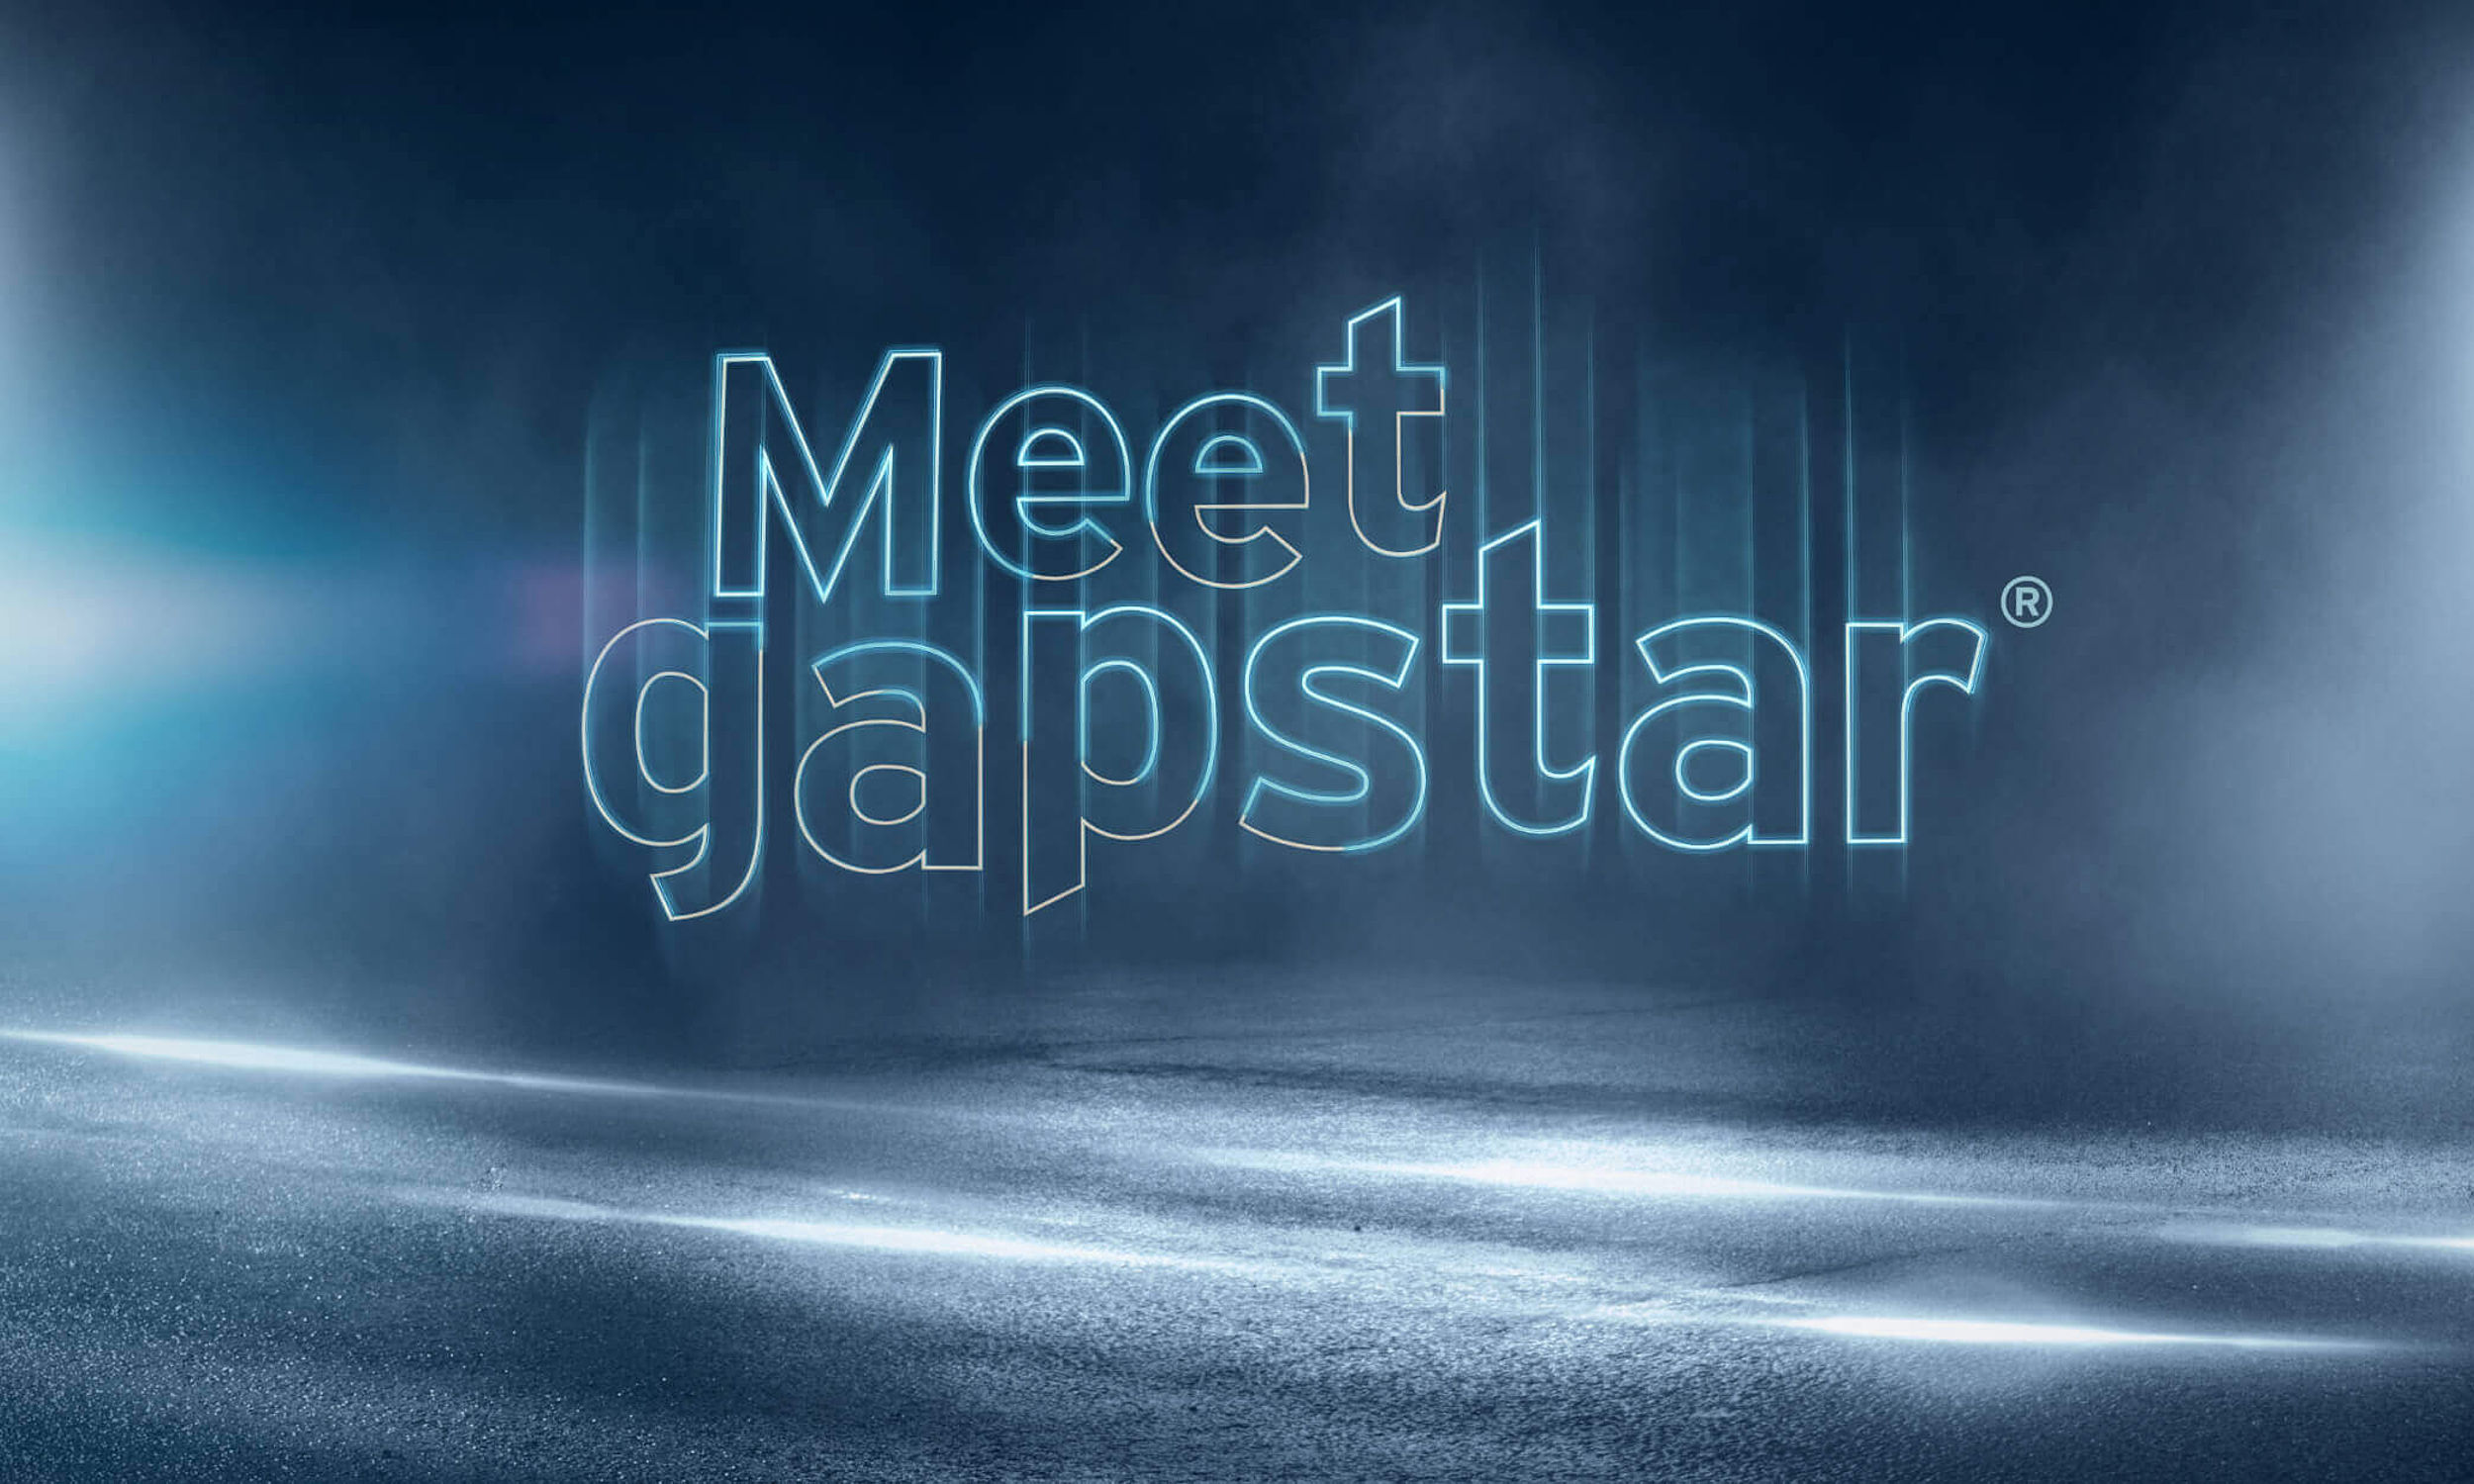 gapstar® ONE – the new benchmark for your efficiency